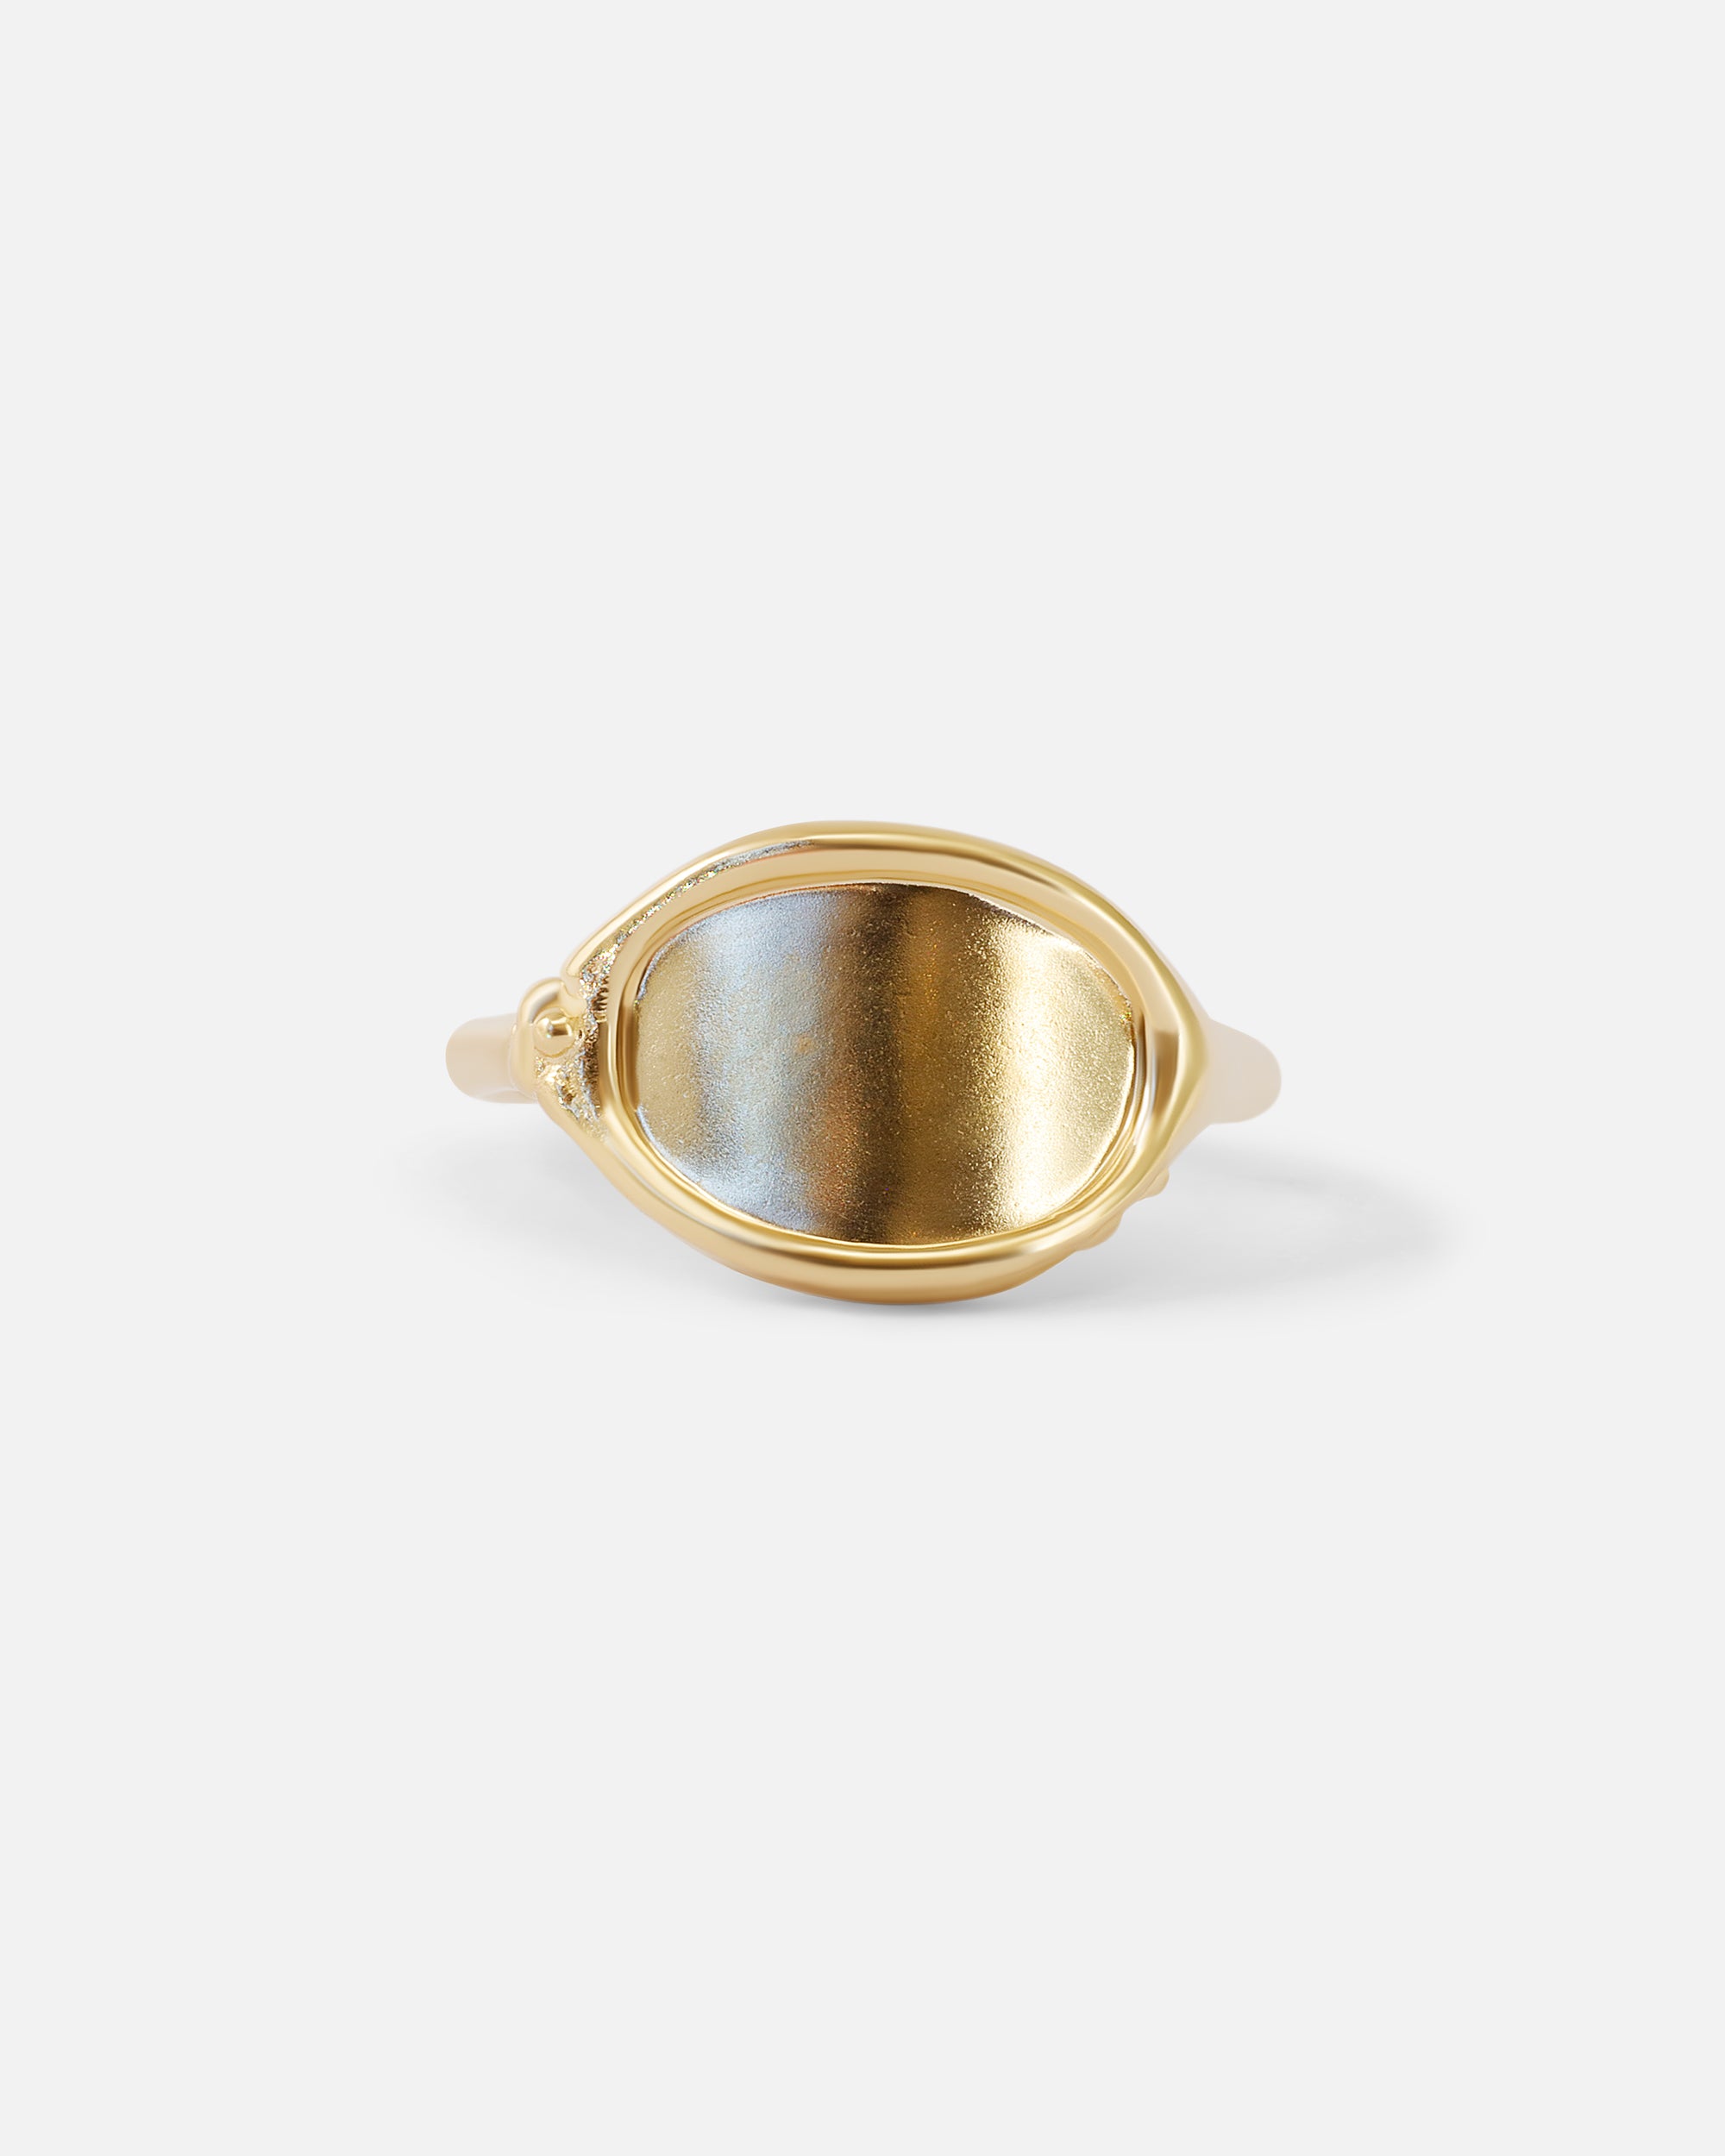 Reflection / I Ring By Alfonzo in rings Category